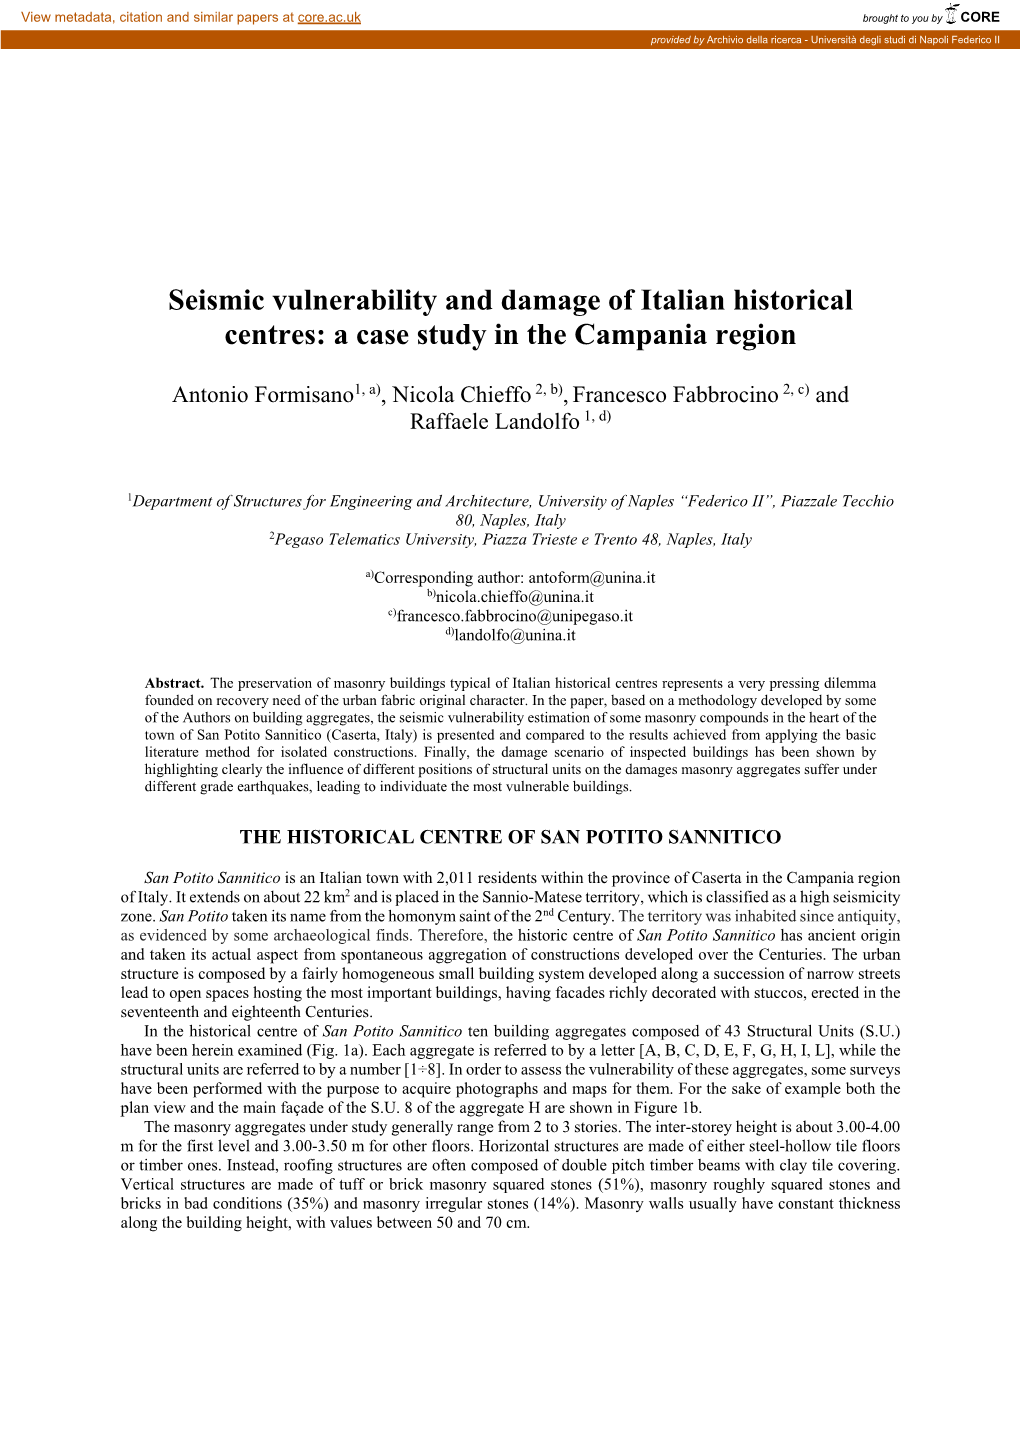 Seismic Vulnerability and Damage of Italian Historical Centres: a Case Study in the Campania Region